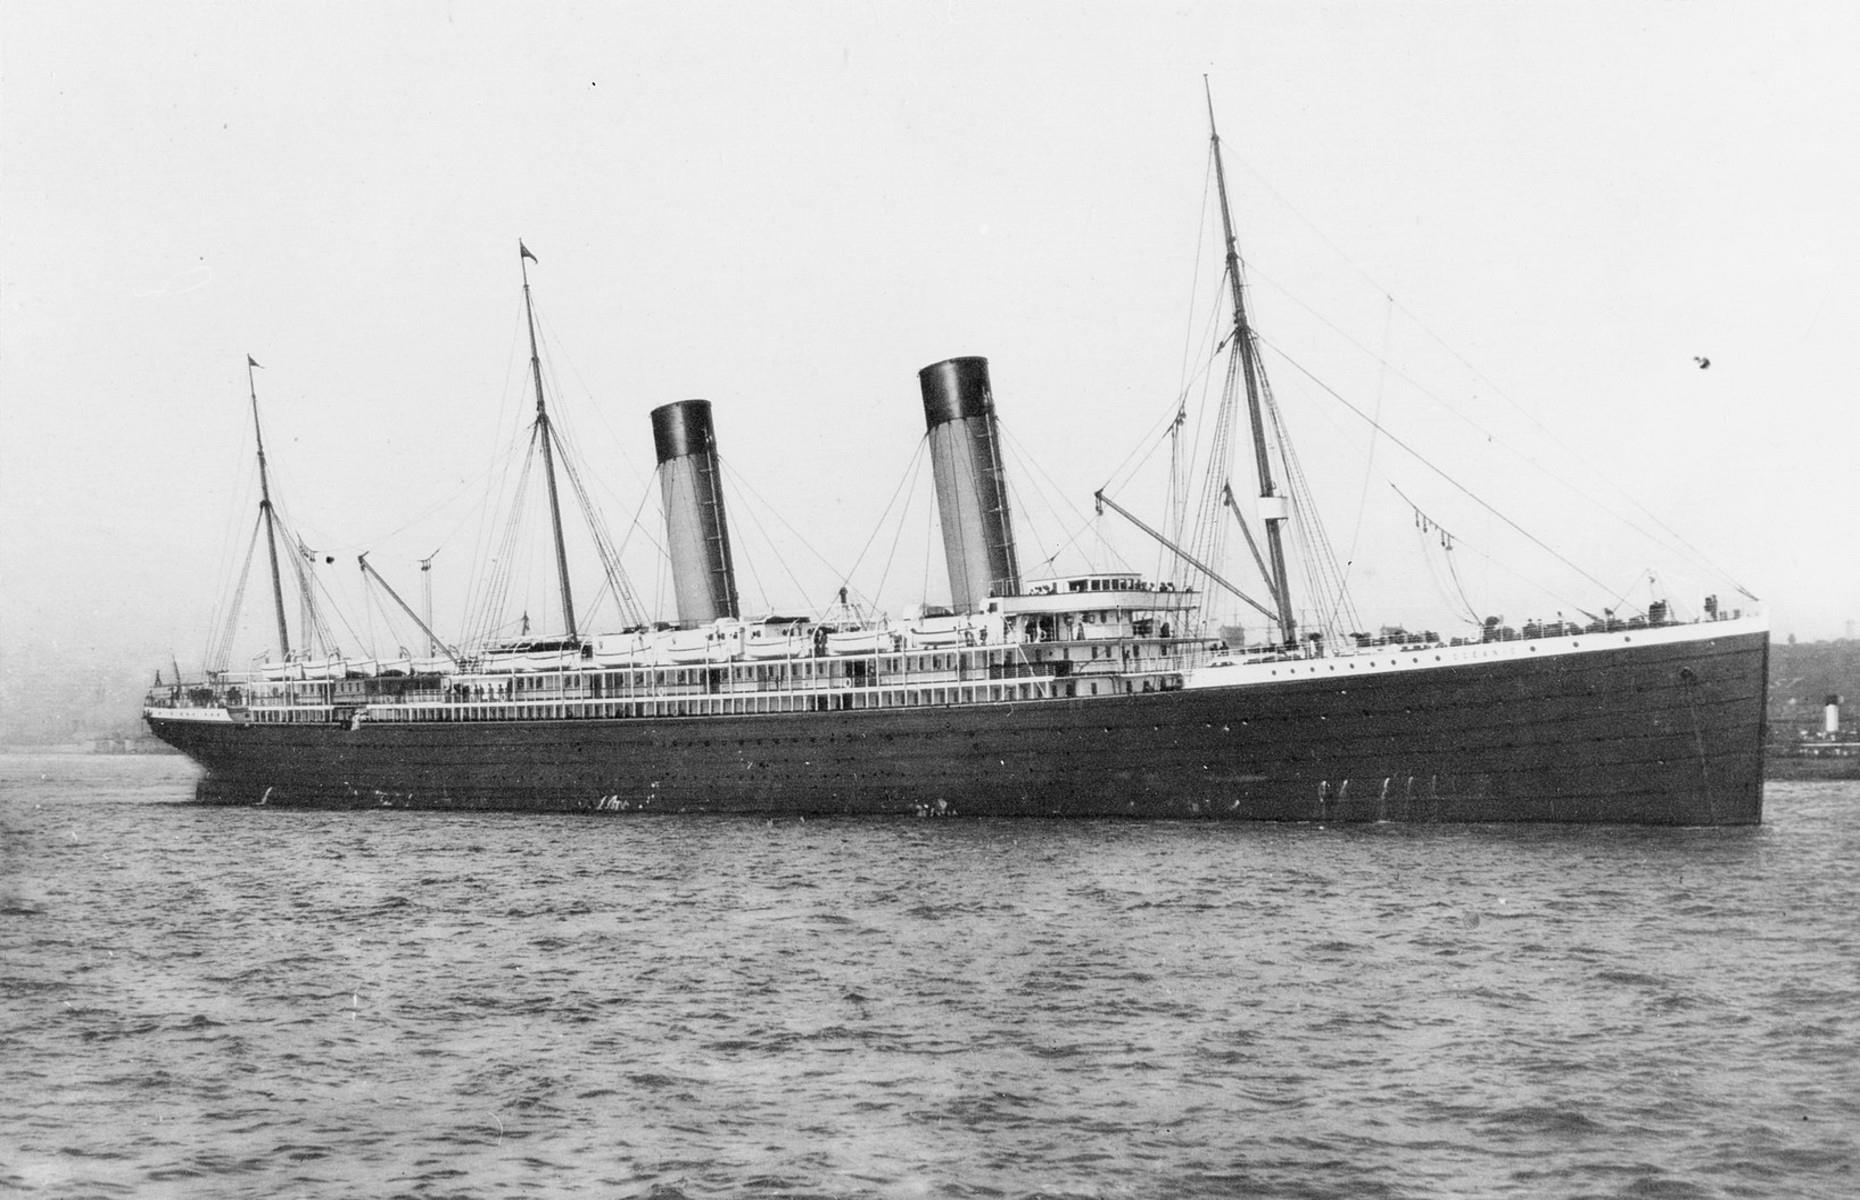 On 14 November 1889, Bly took the Augusta Victoria steamship from New York to England and arrived in London seven days later. She went on to Paris by train and met Jules Verne himself who wished her luck. After, she continued by train to Brindisi in Italy and by ship through the Suez canal and to Sri Lanka. From Colombo, Bly sailed the 3,500 miles (5,632km) to Hong Kong via Singapore. Then on to Japan where she caught the White Star Line's Oceanic steamship, pictured here.